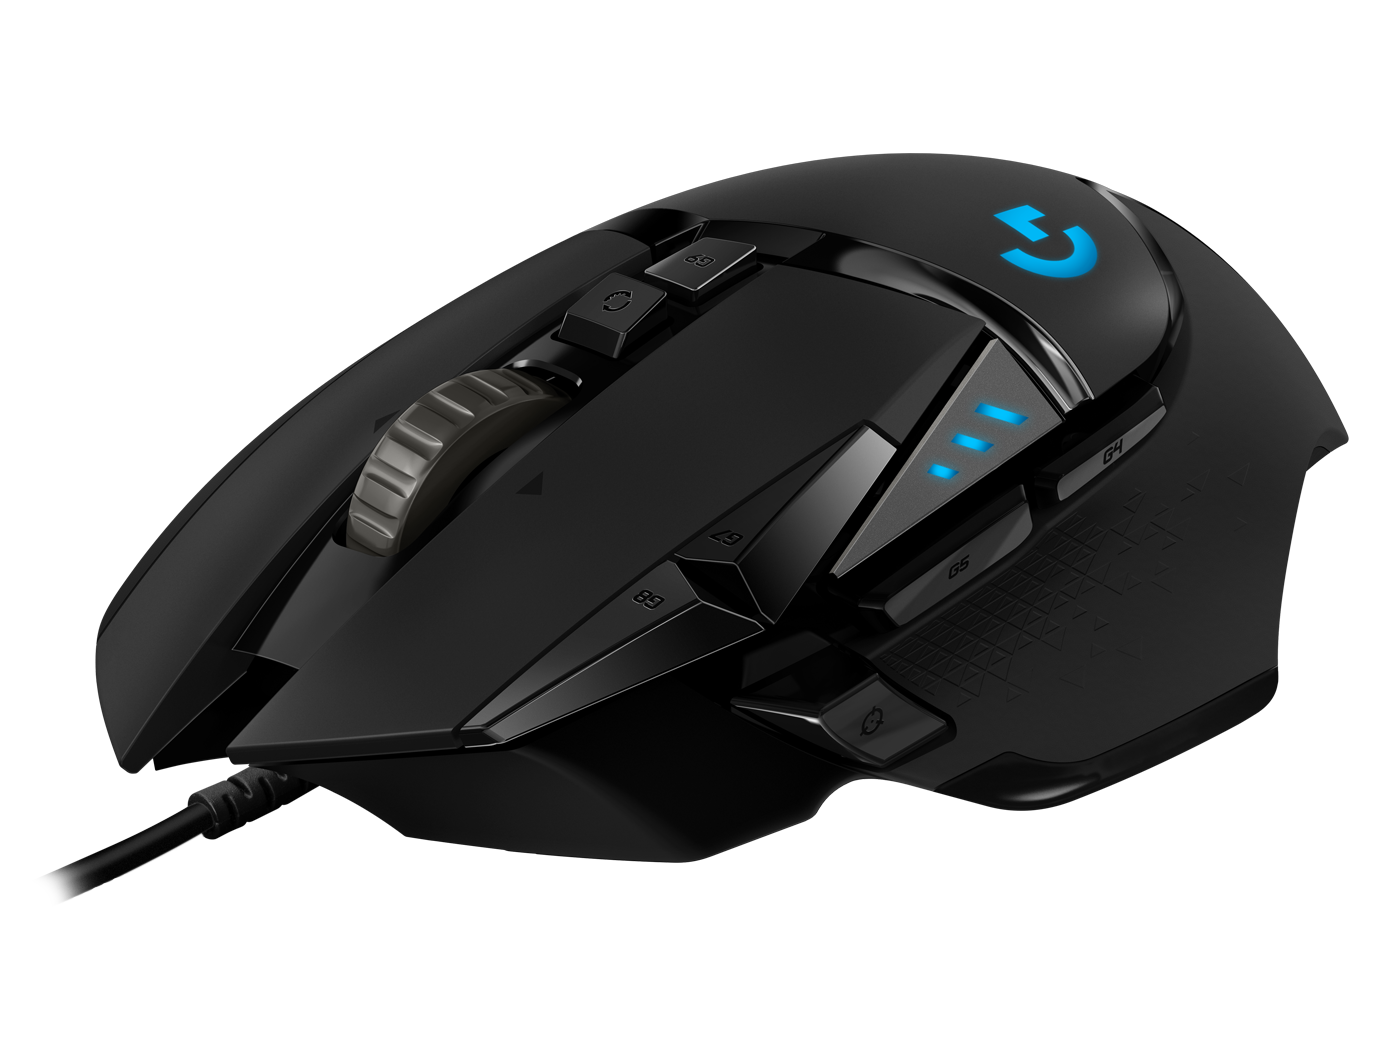 How to Install Logitech Mouse G502 Hero Software on Linux Arch - Featured